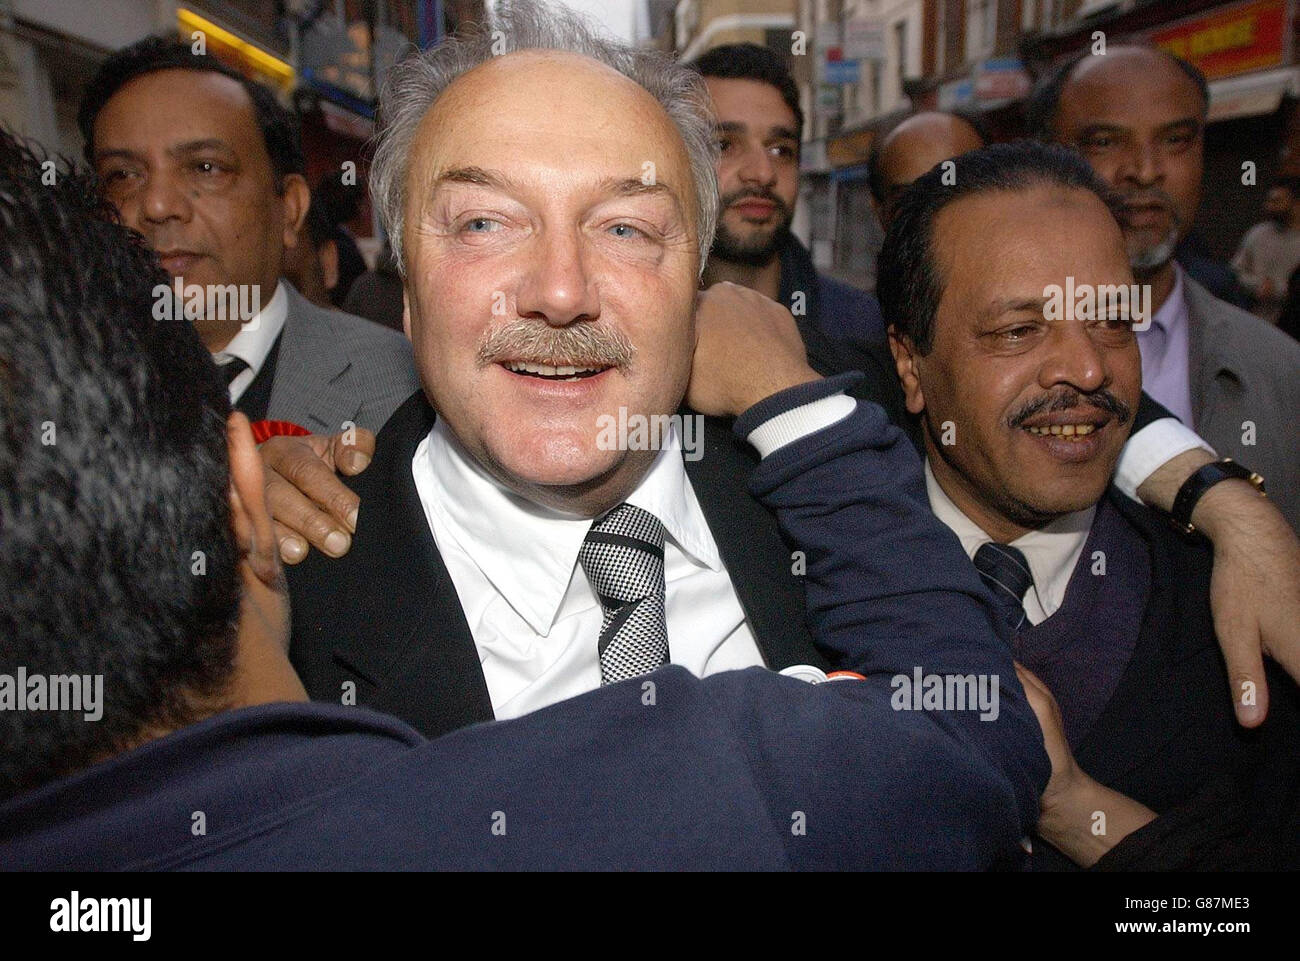 Former Labour MP and new Respect MP for Bethnal Green and Bow, George Galloway, greets supporters in London's Brick Lane. Galloway beat previous Labour MP Oona King for the seat which had been held by Labour since 1945. Stock Photo